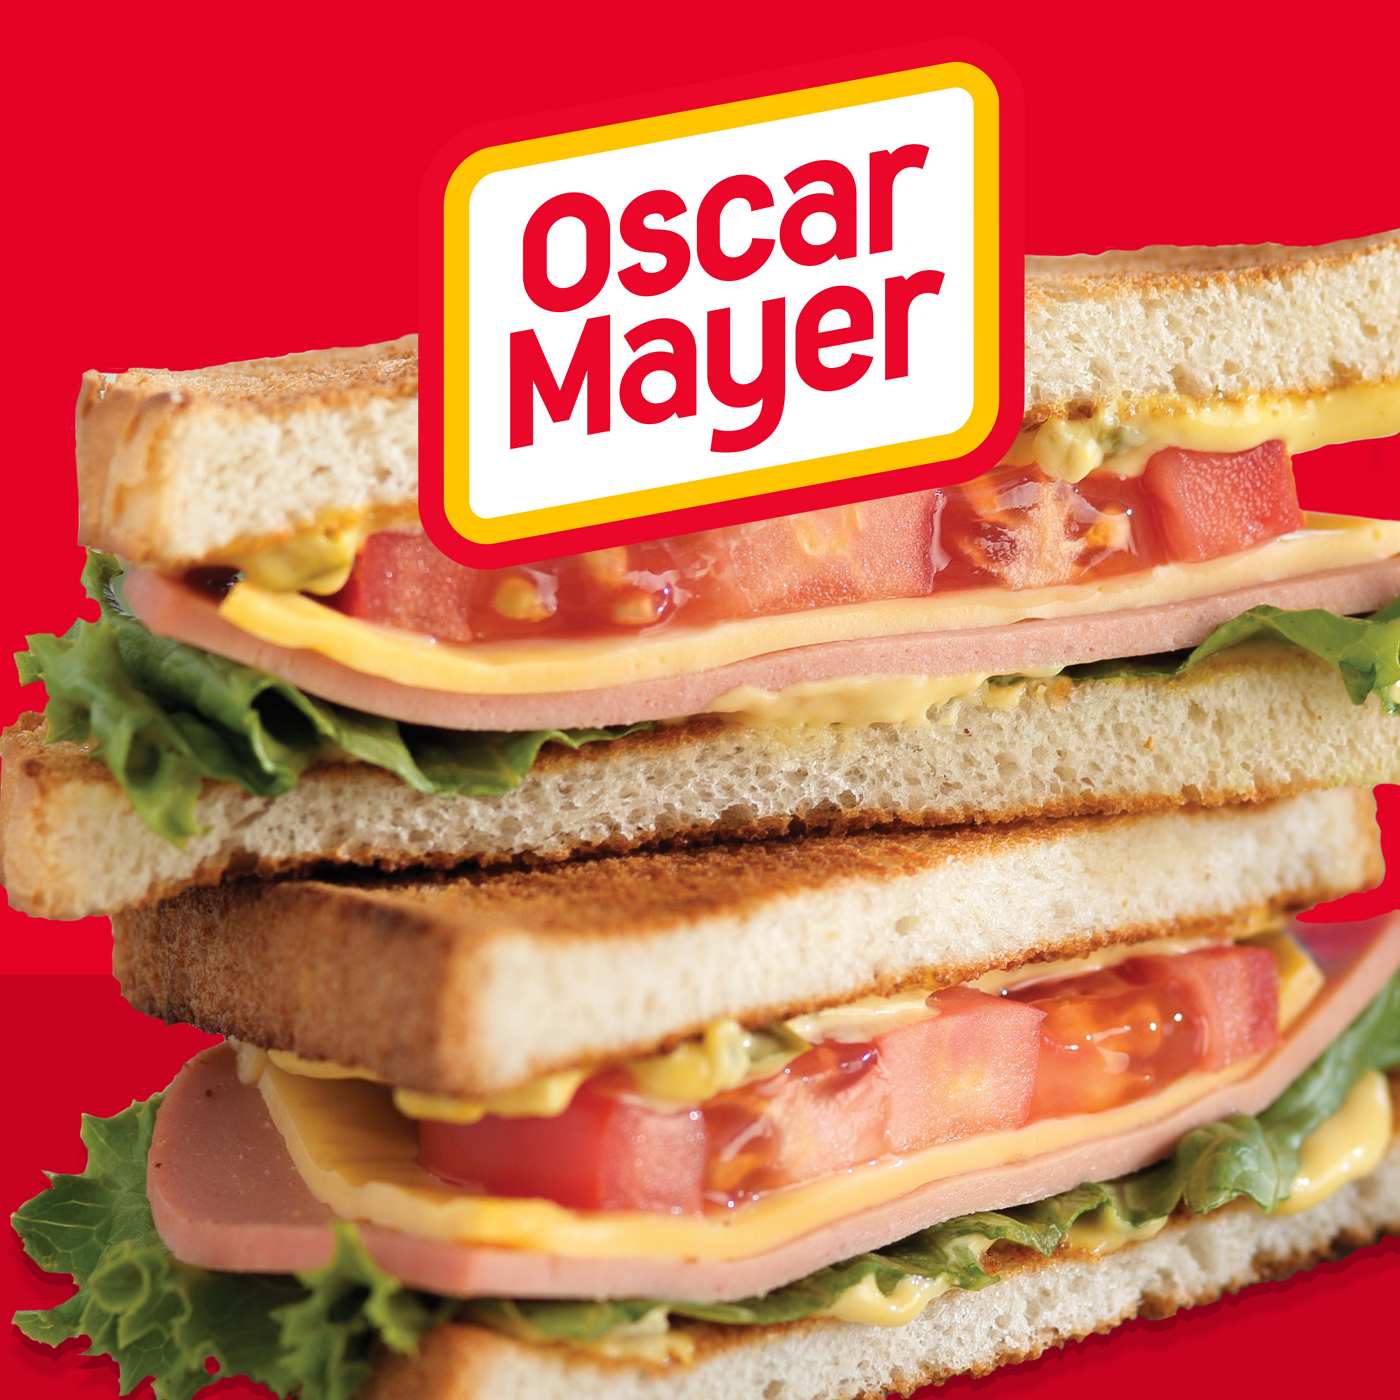 Oscar Mayer Bologna Sliced Lunch Meat, Super Thick Cut; image 4 of 4